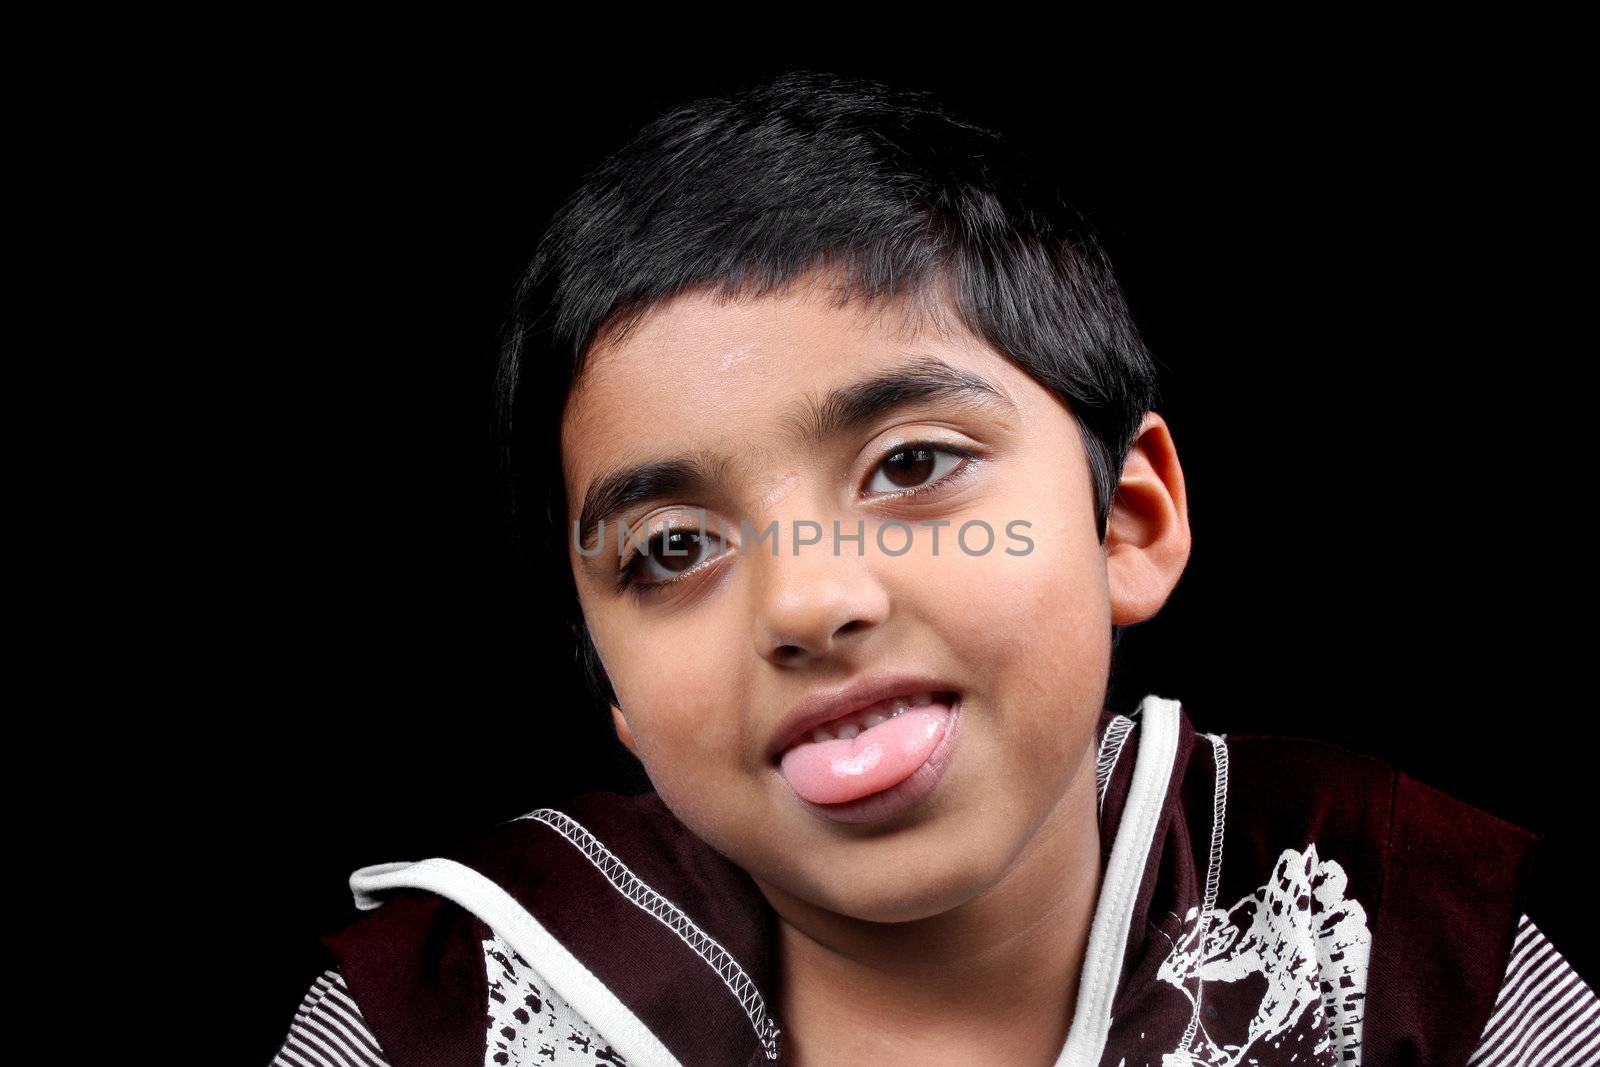 A portrait of a cute Indian boy teasing, sticking his tongue out, on black studio background.